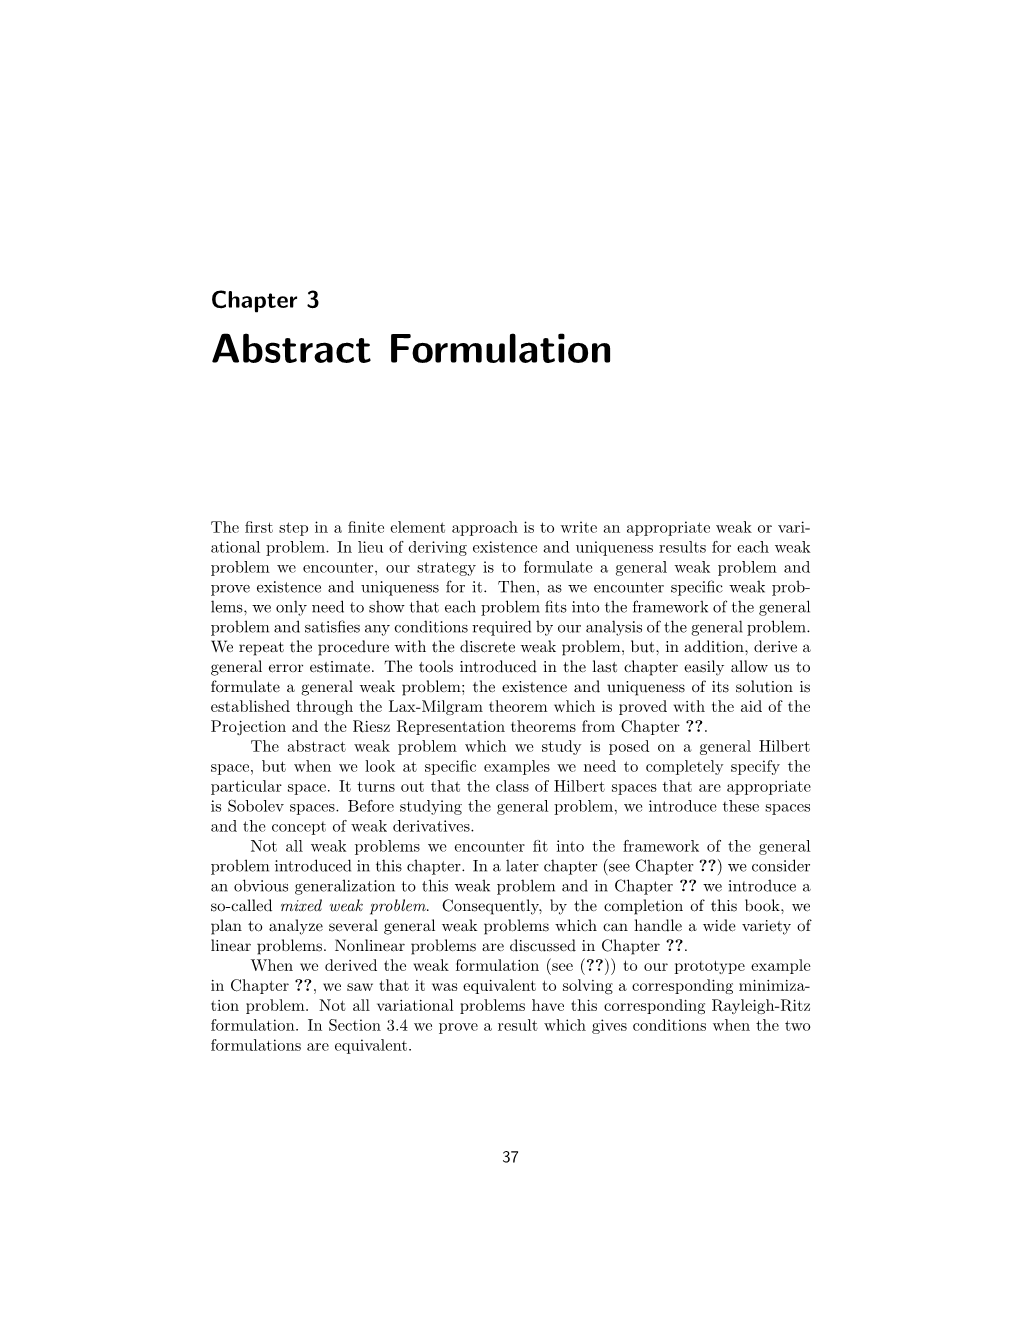 Abstract Formulation